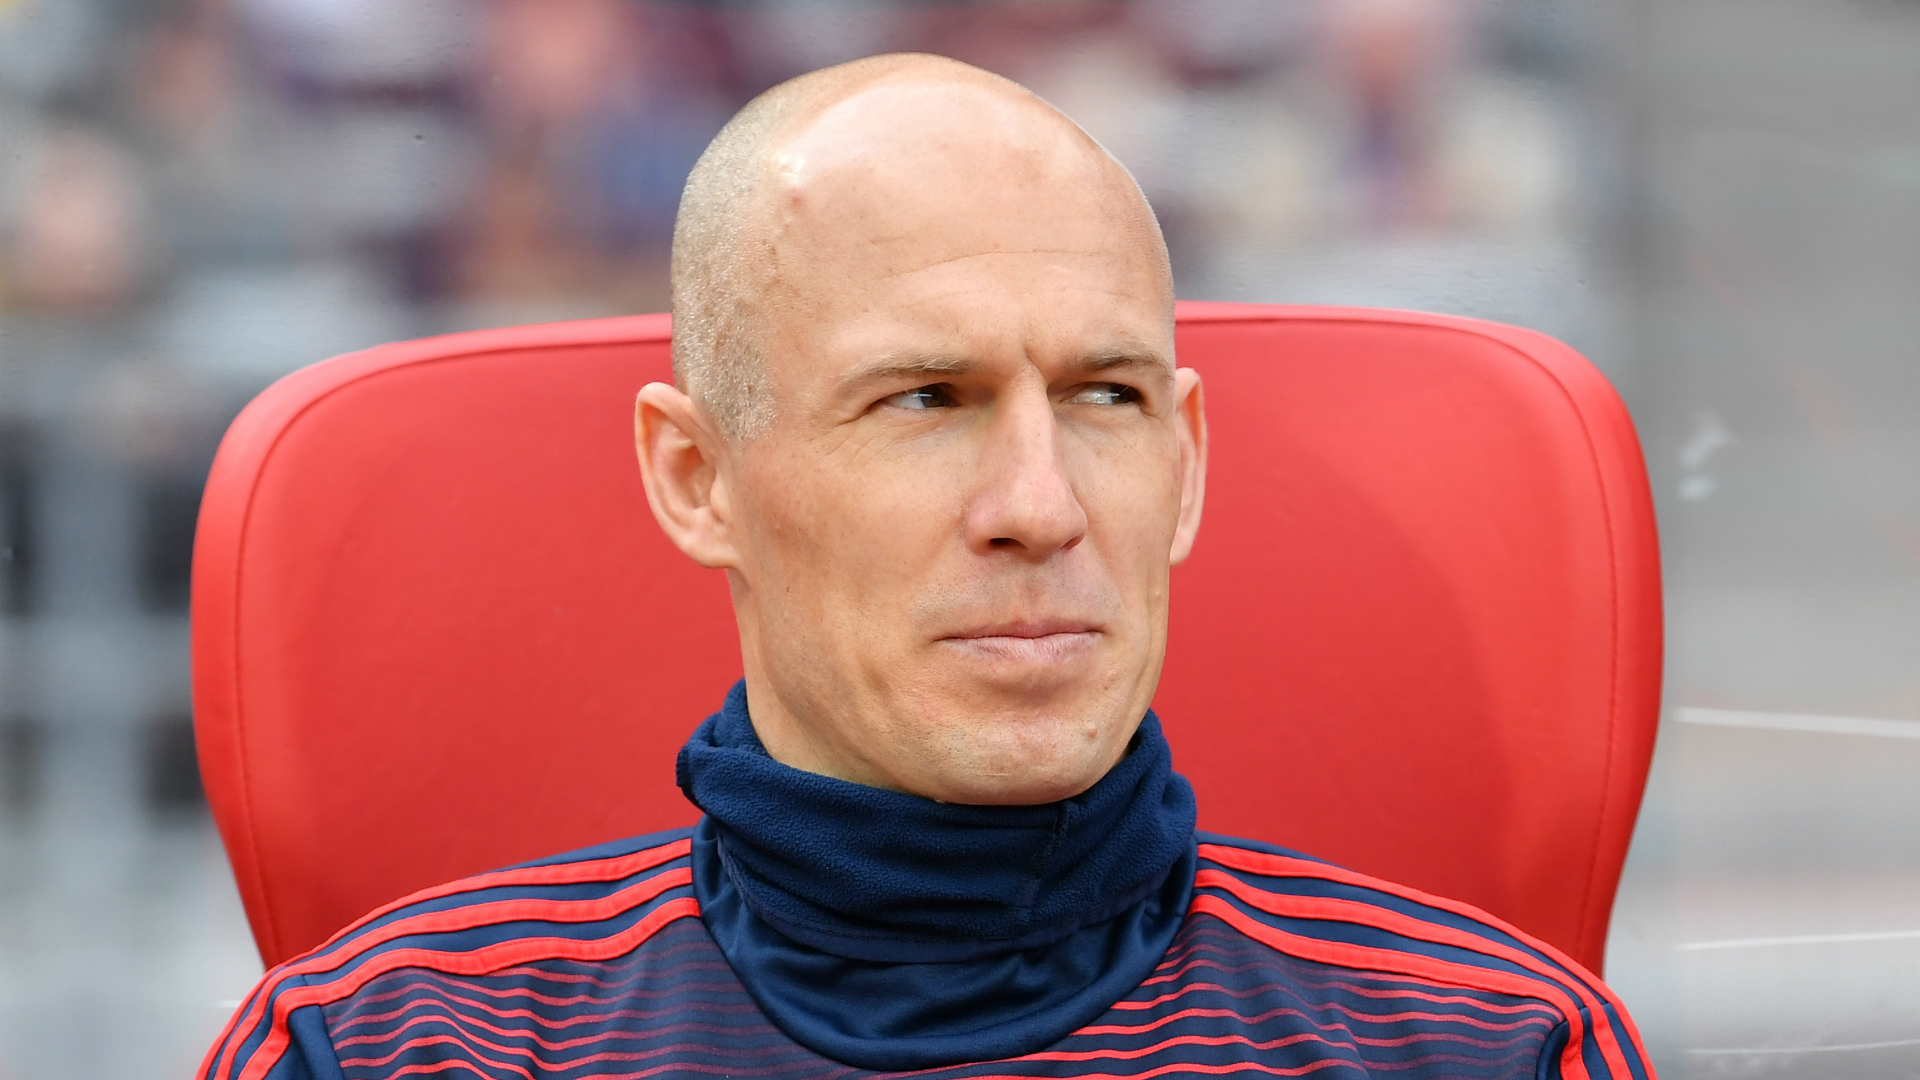 PSV are keen to sign Arjen Robben, claims Mark van Bommel, who added it will be hard to keep rumoured Manchester City target Angelino.